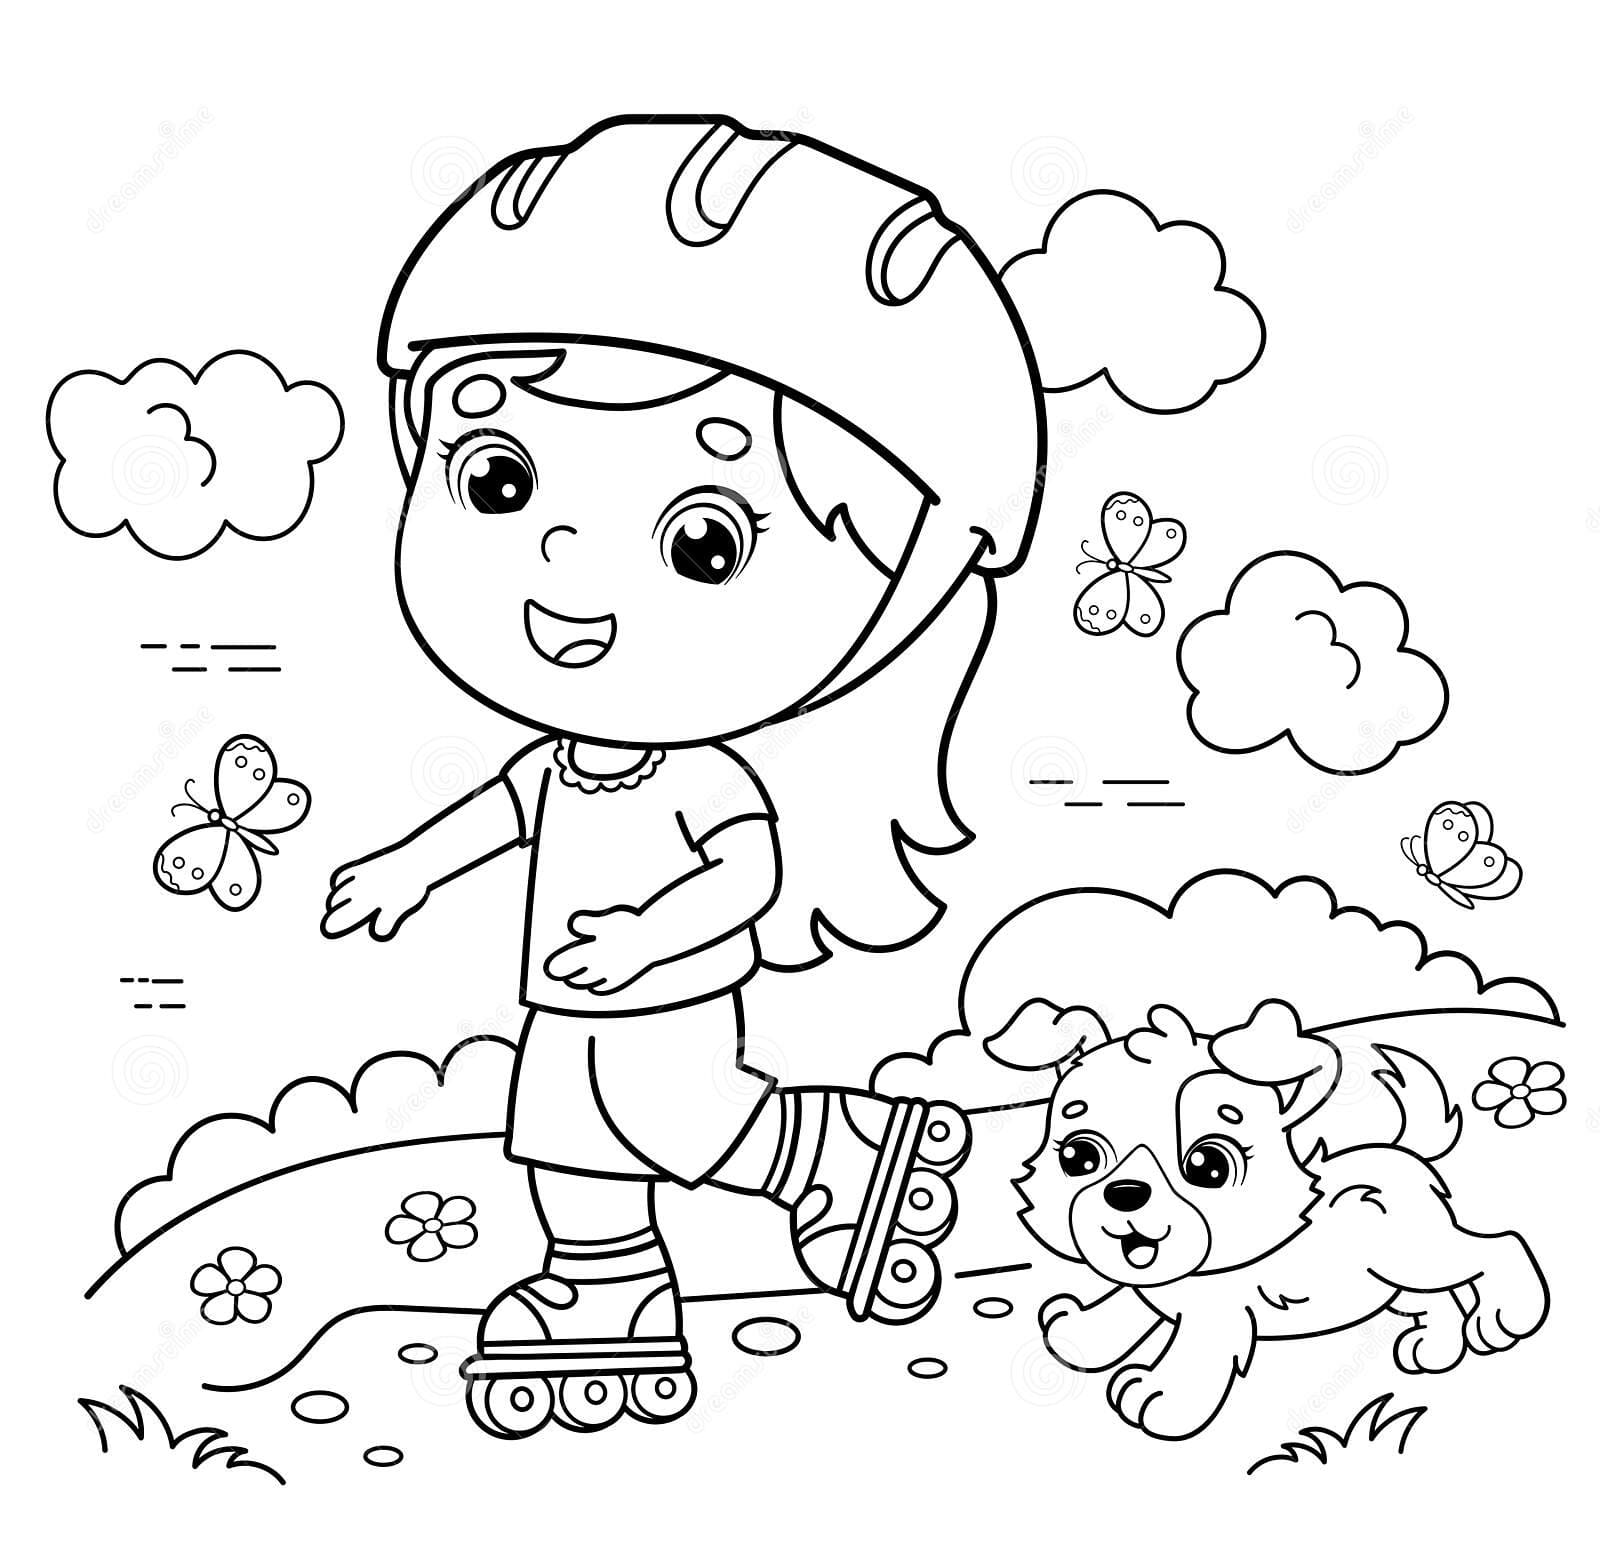 Cartoon Girl On The Roller Skates Image Coloring Page